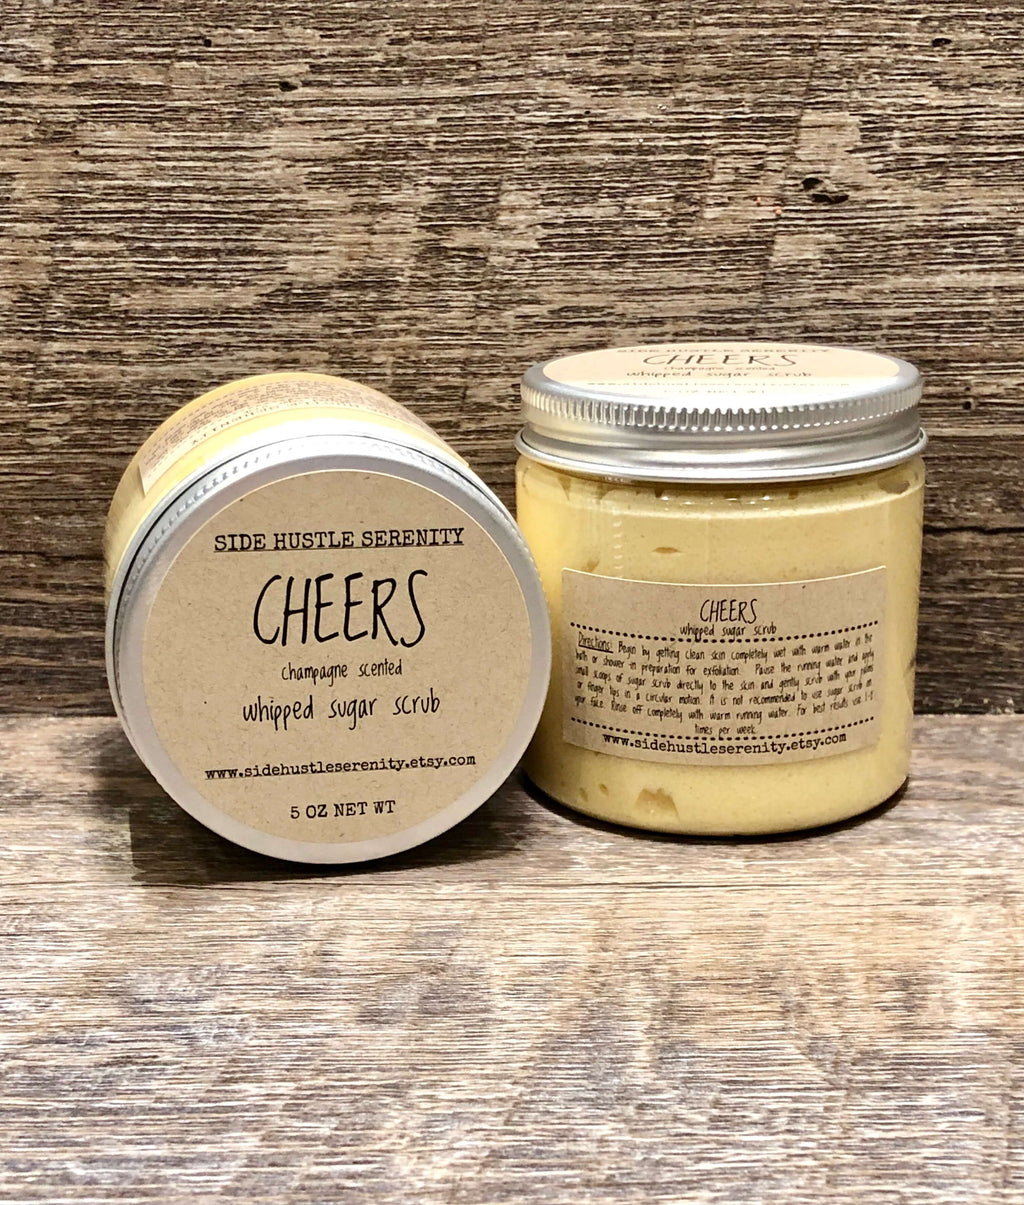 Whipped Sugar Scrub | CHEERS "Champagne" Scented - Side Hustle Serenity